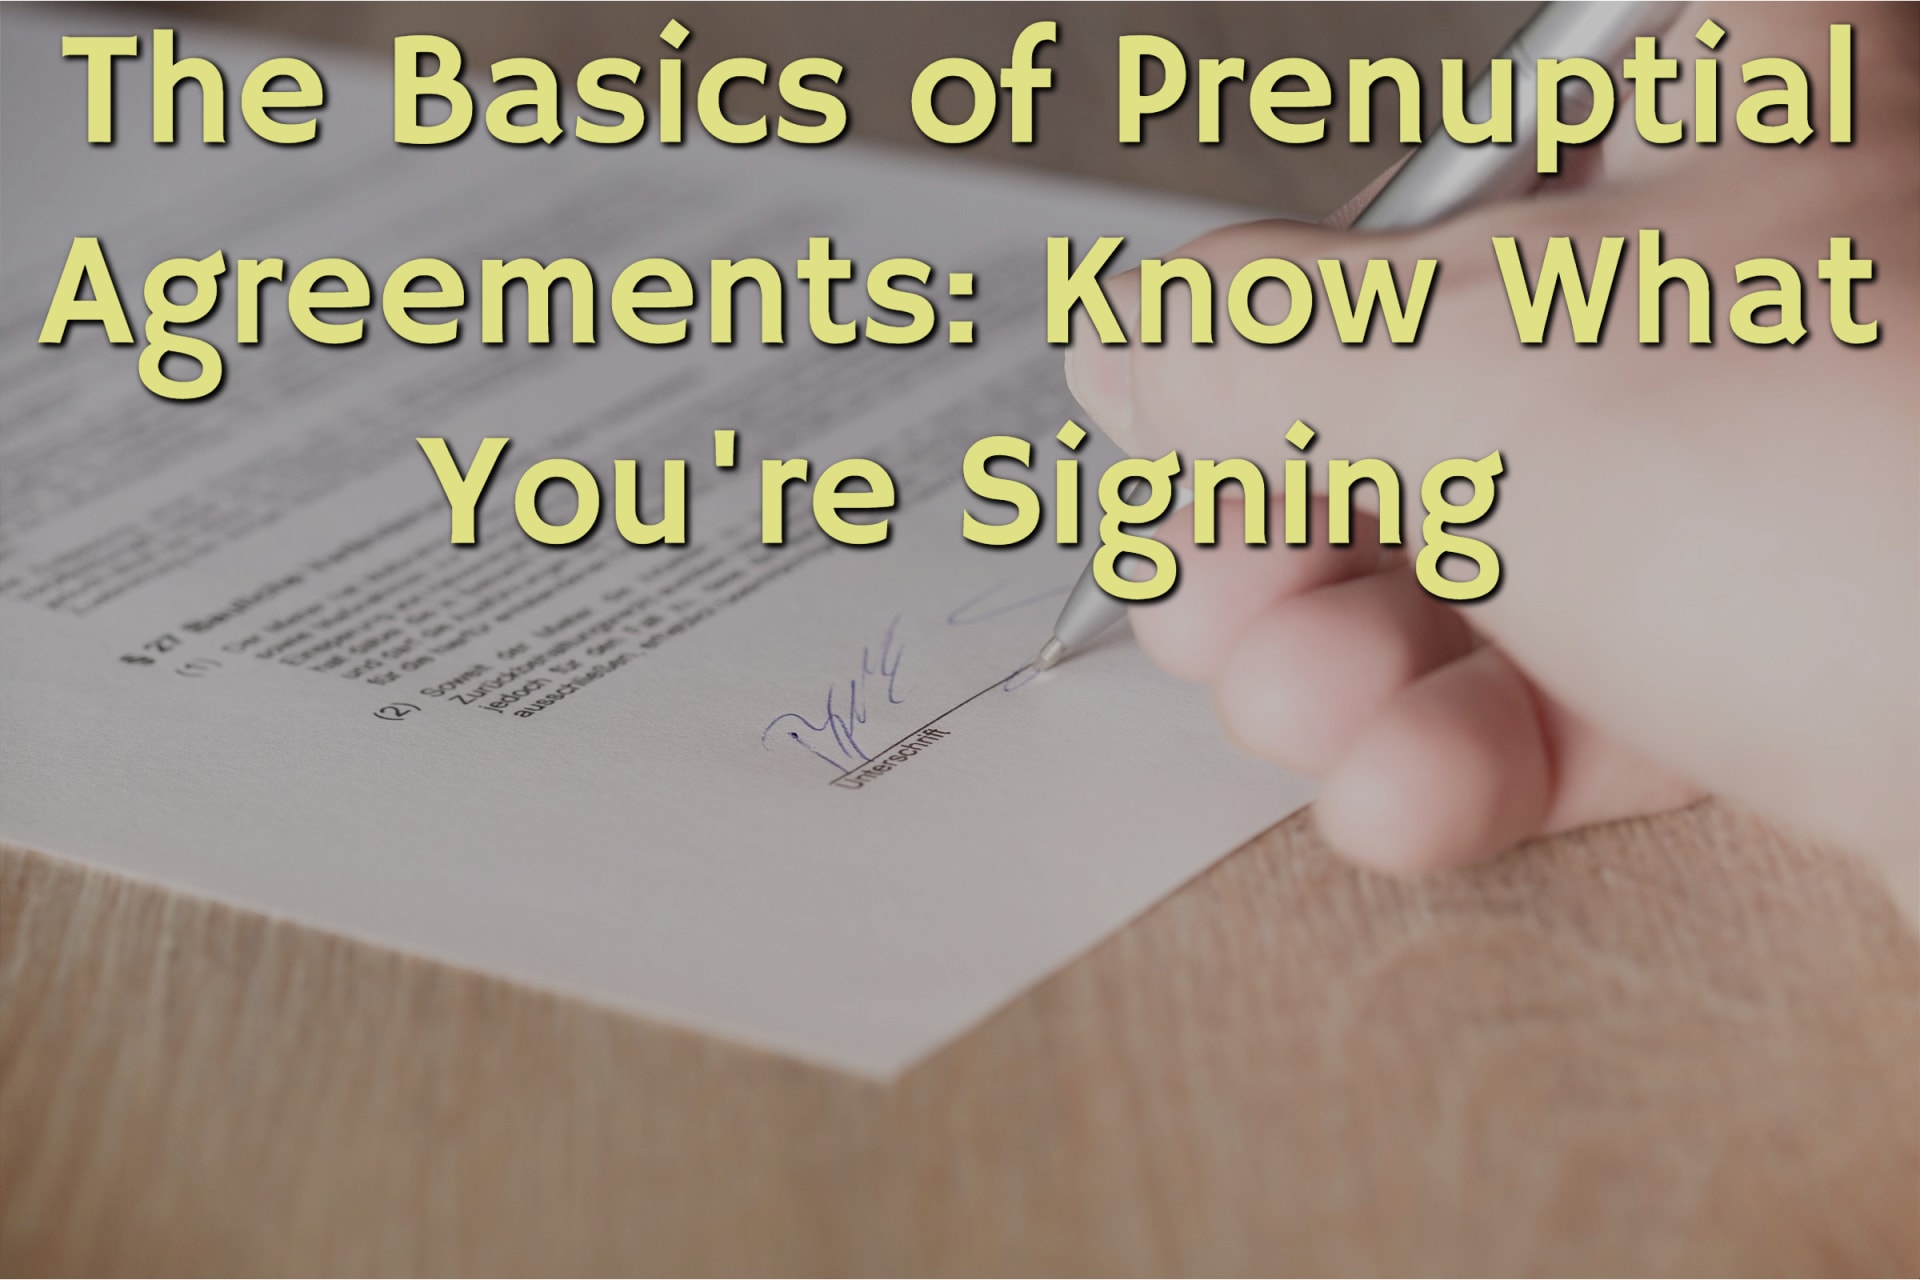 Signing prenuptial agreements